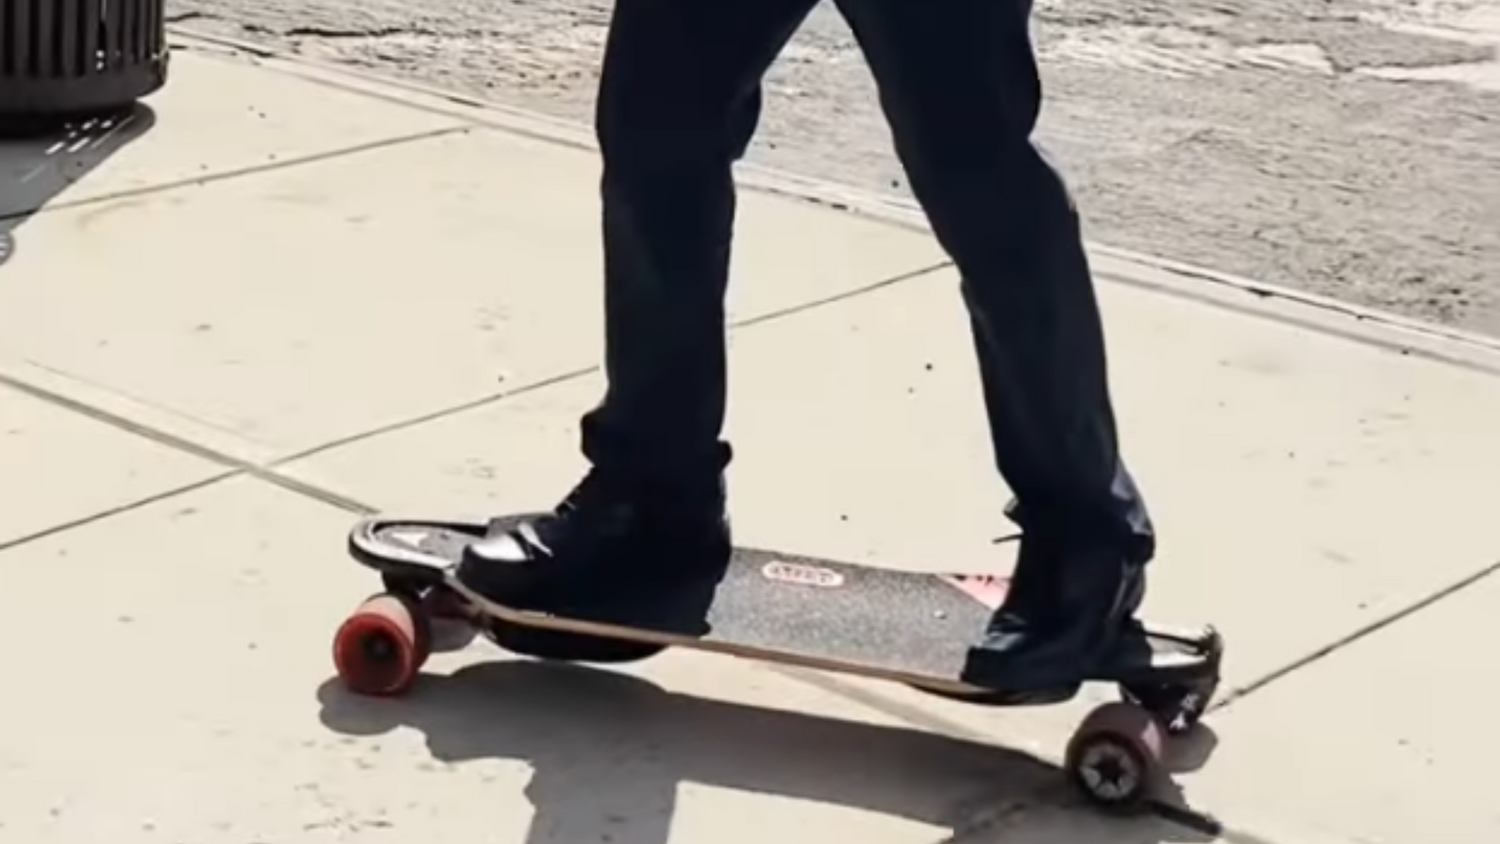 All Politics Aside, We Like Seeing Public Figures Ride Meepo Boards